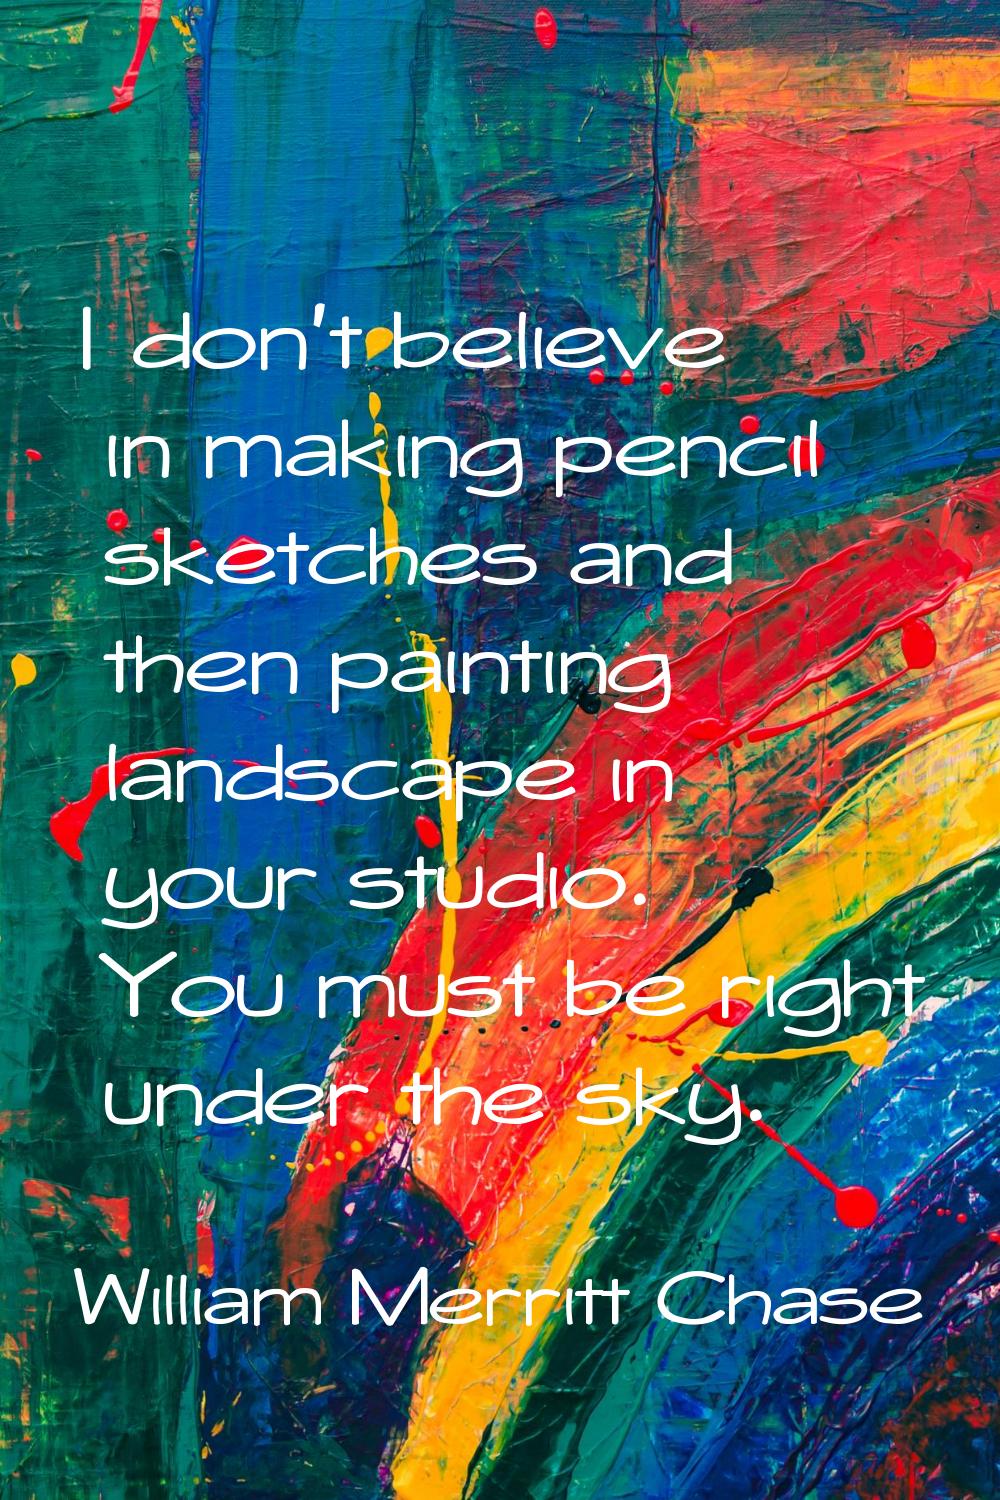 I don't believe in making pencil sketches and then painting landscape in your studio. You must be r